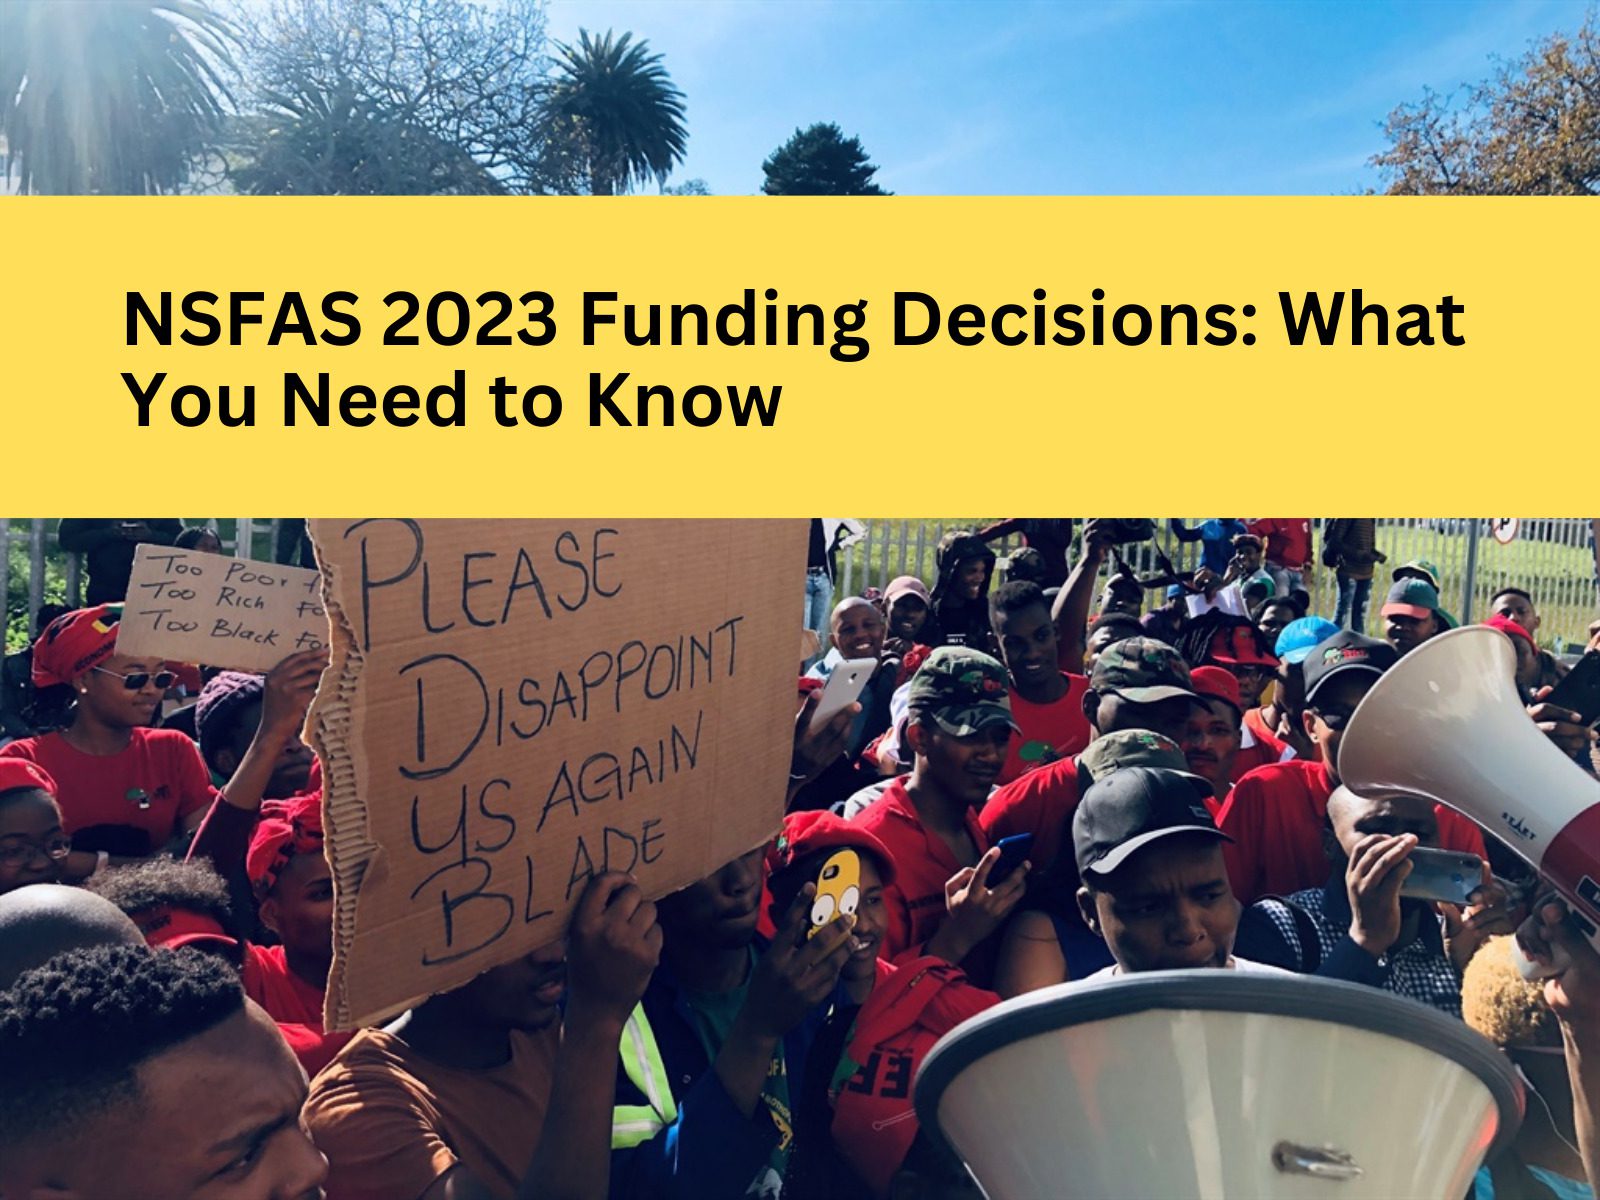 NSFAS 2023 Funding Decisions What You Need to Know